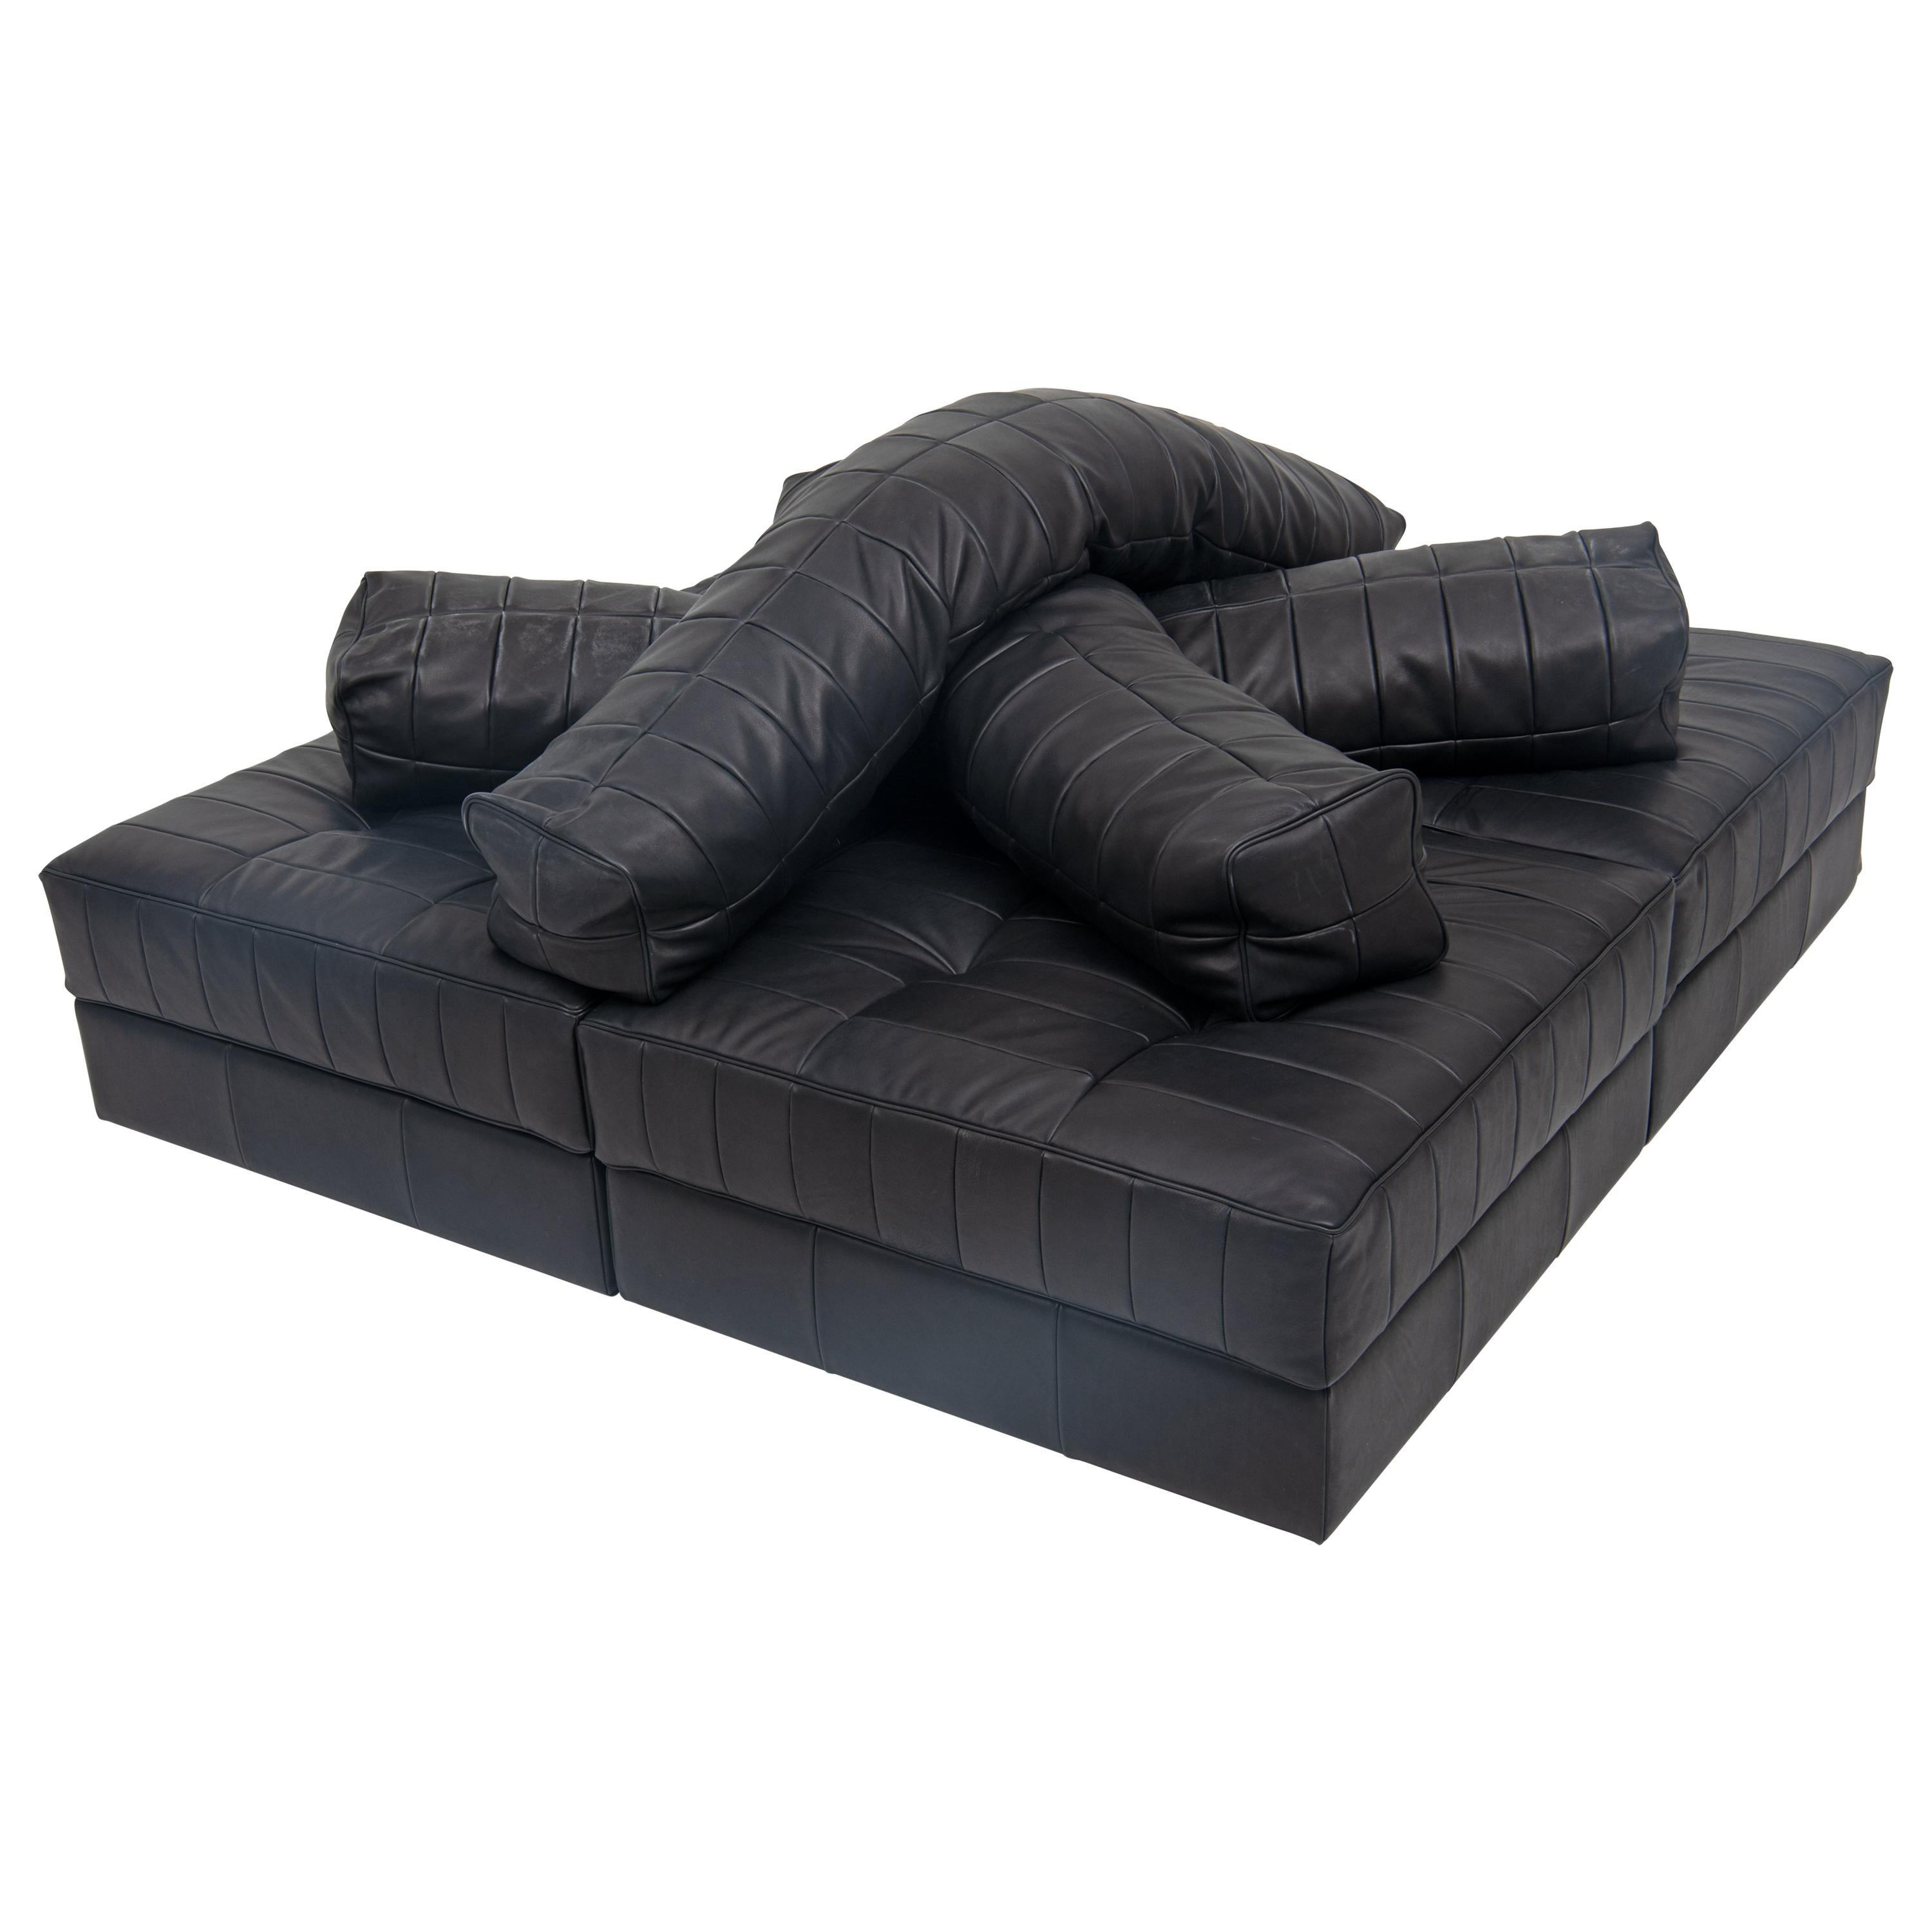 For Sale: Black DS-1088 Configurable Patchwork Leather Sofa with Elongated Cushions by De Sede